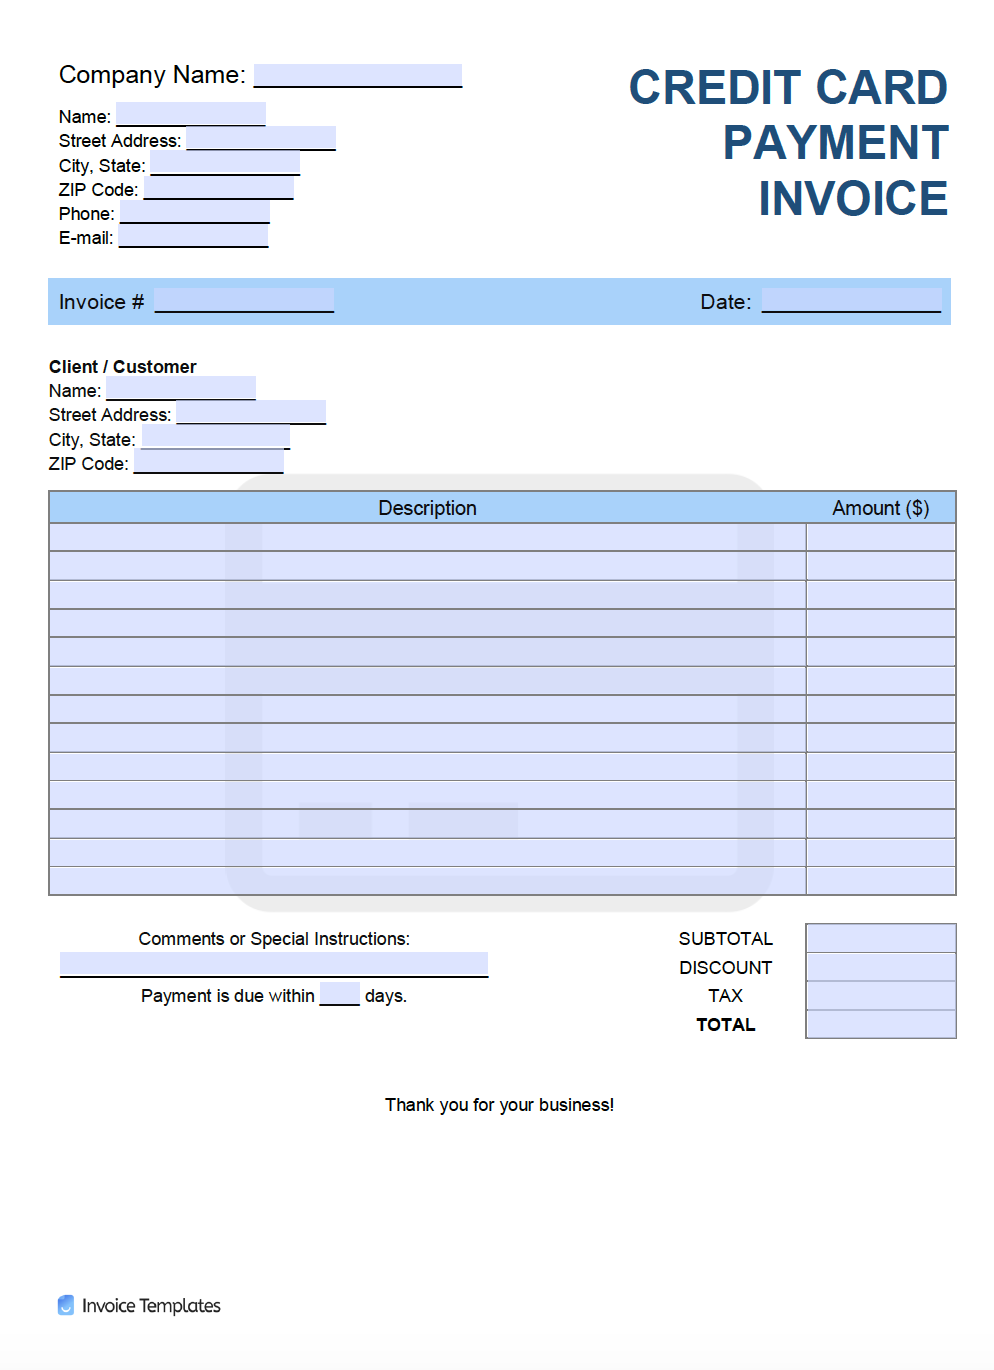 Free Credit Card (cc) Payment Invoice Template  PDF  WORD  EXCEL Regarding Credit Card Bill Template